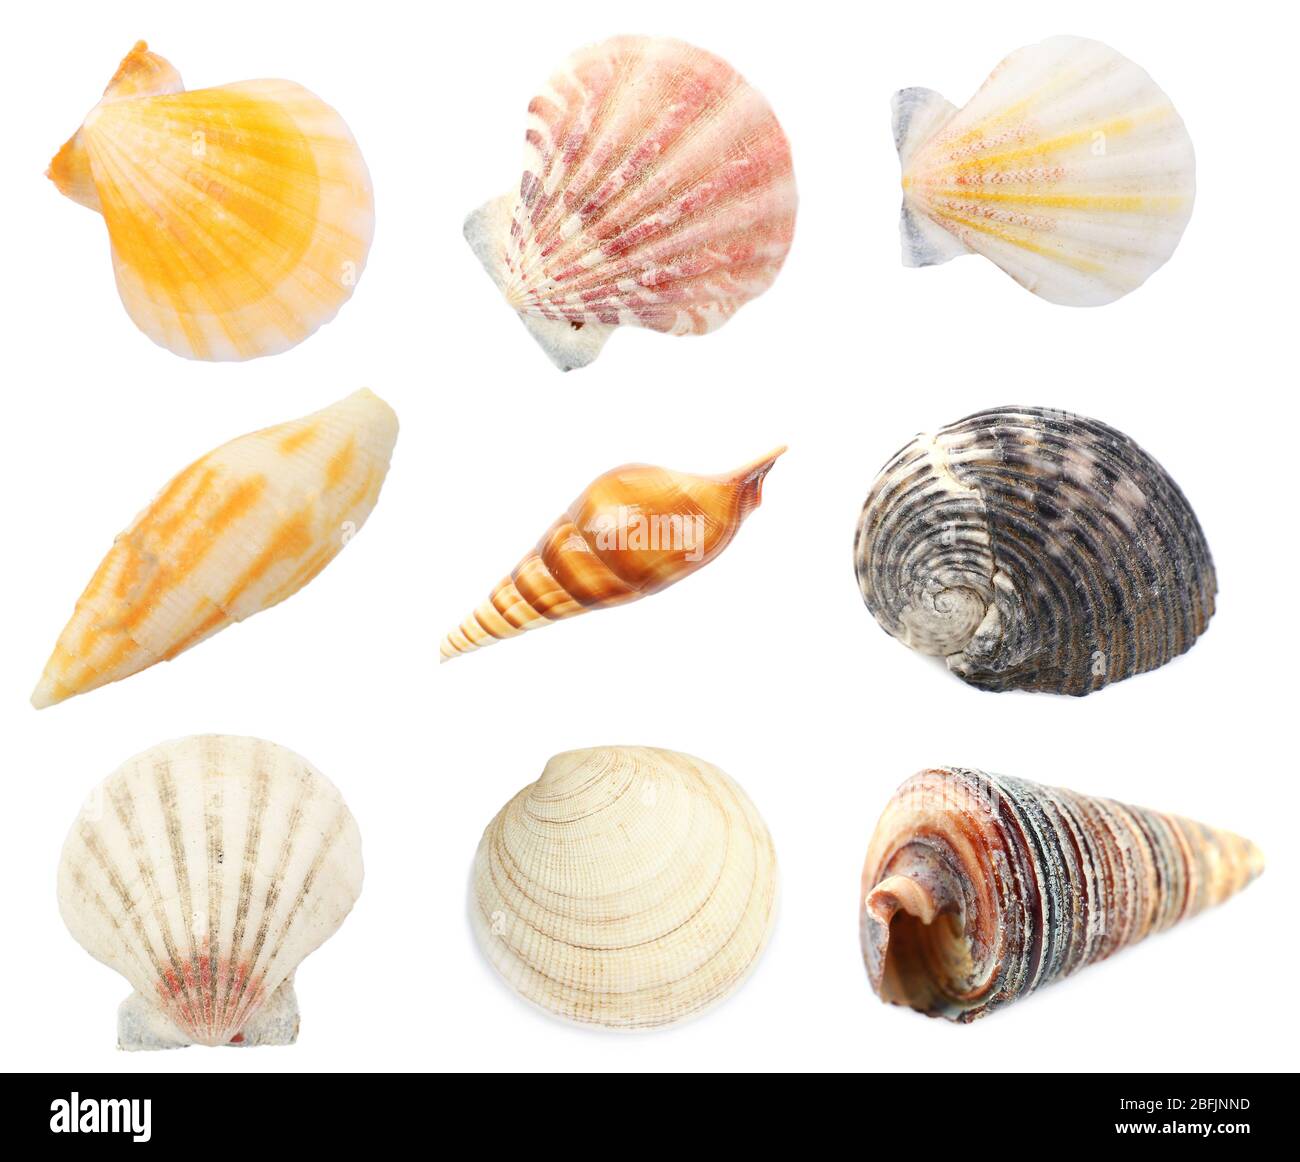 Collage of shells isolated on white Stock Photo